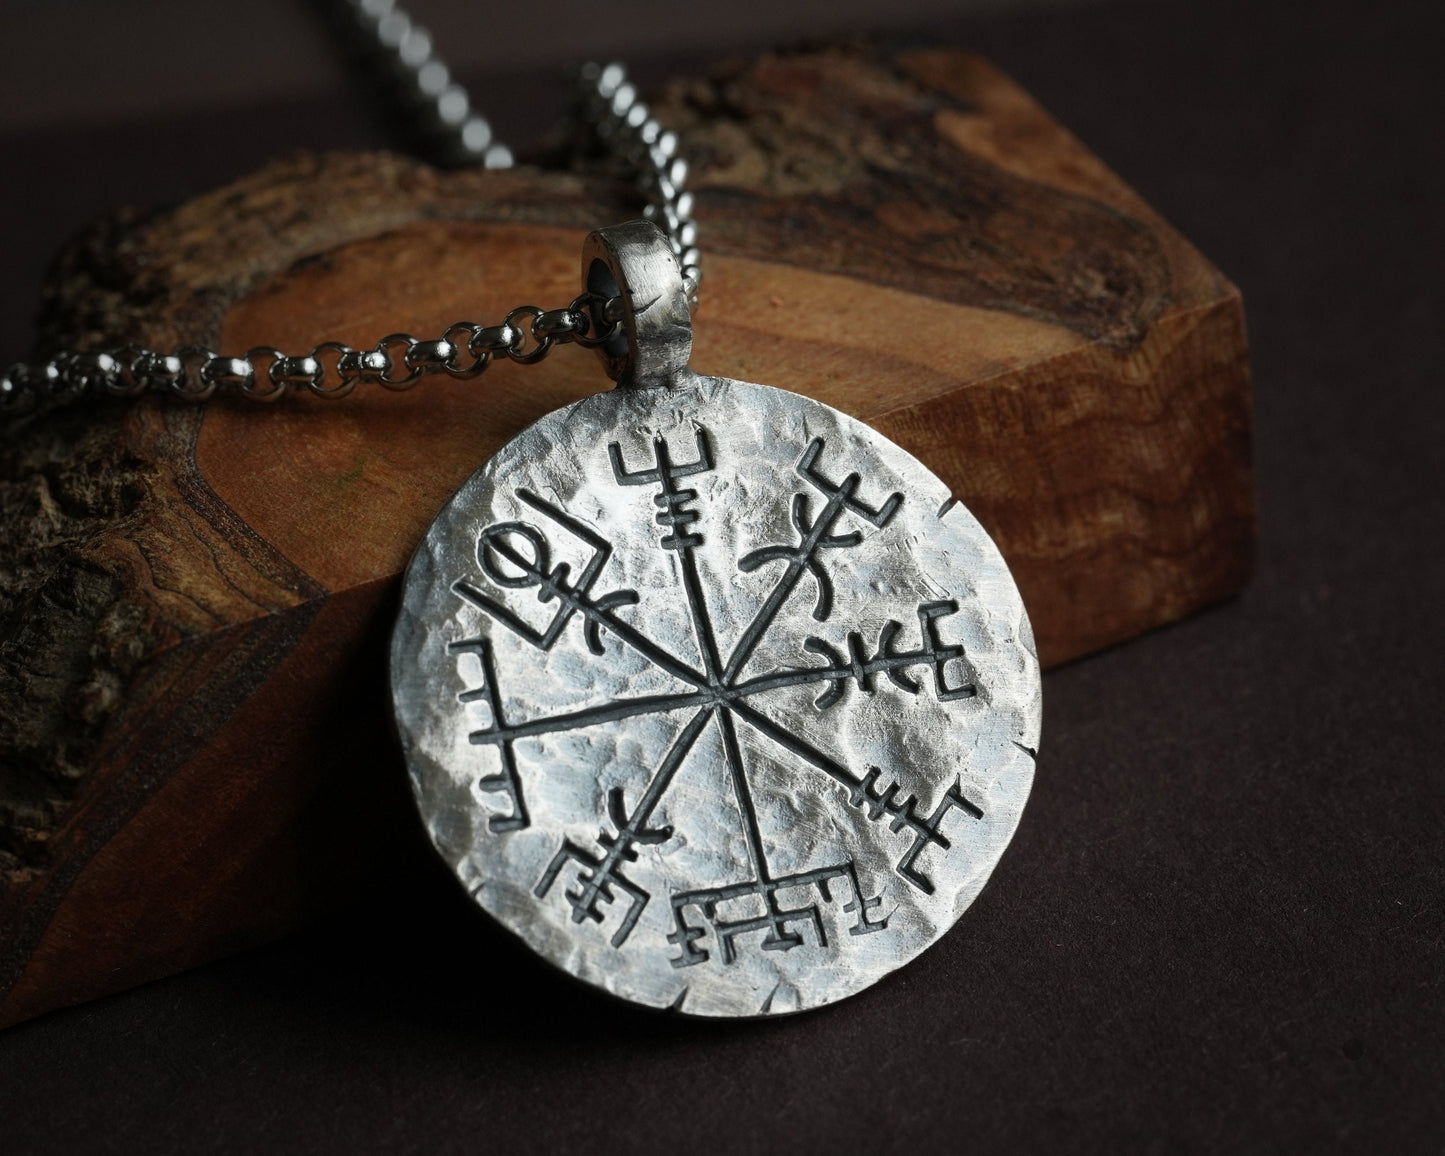 Vegvisir Necklace - Viking Compass - Traveler's Protective Pendant With Chain - Viking Jewelry for Protection and Guidance